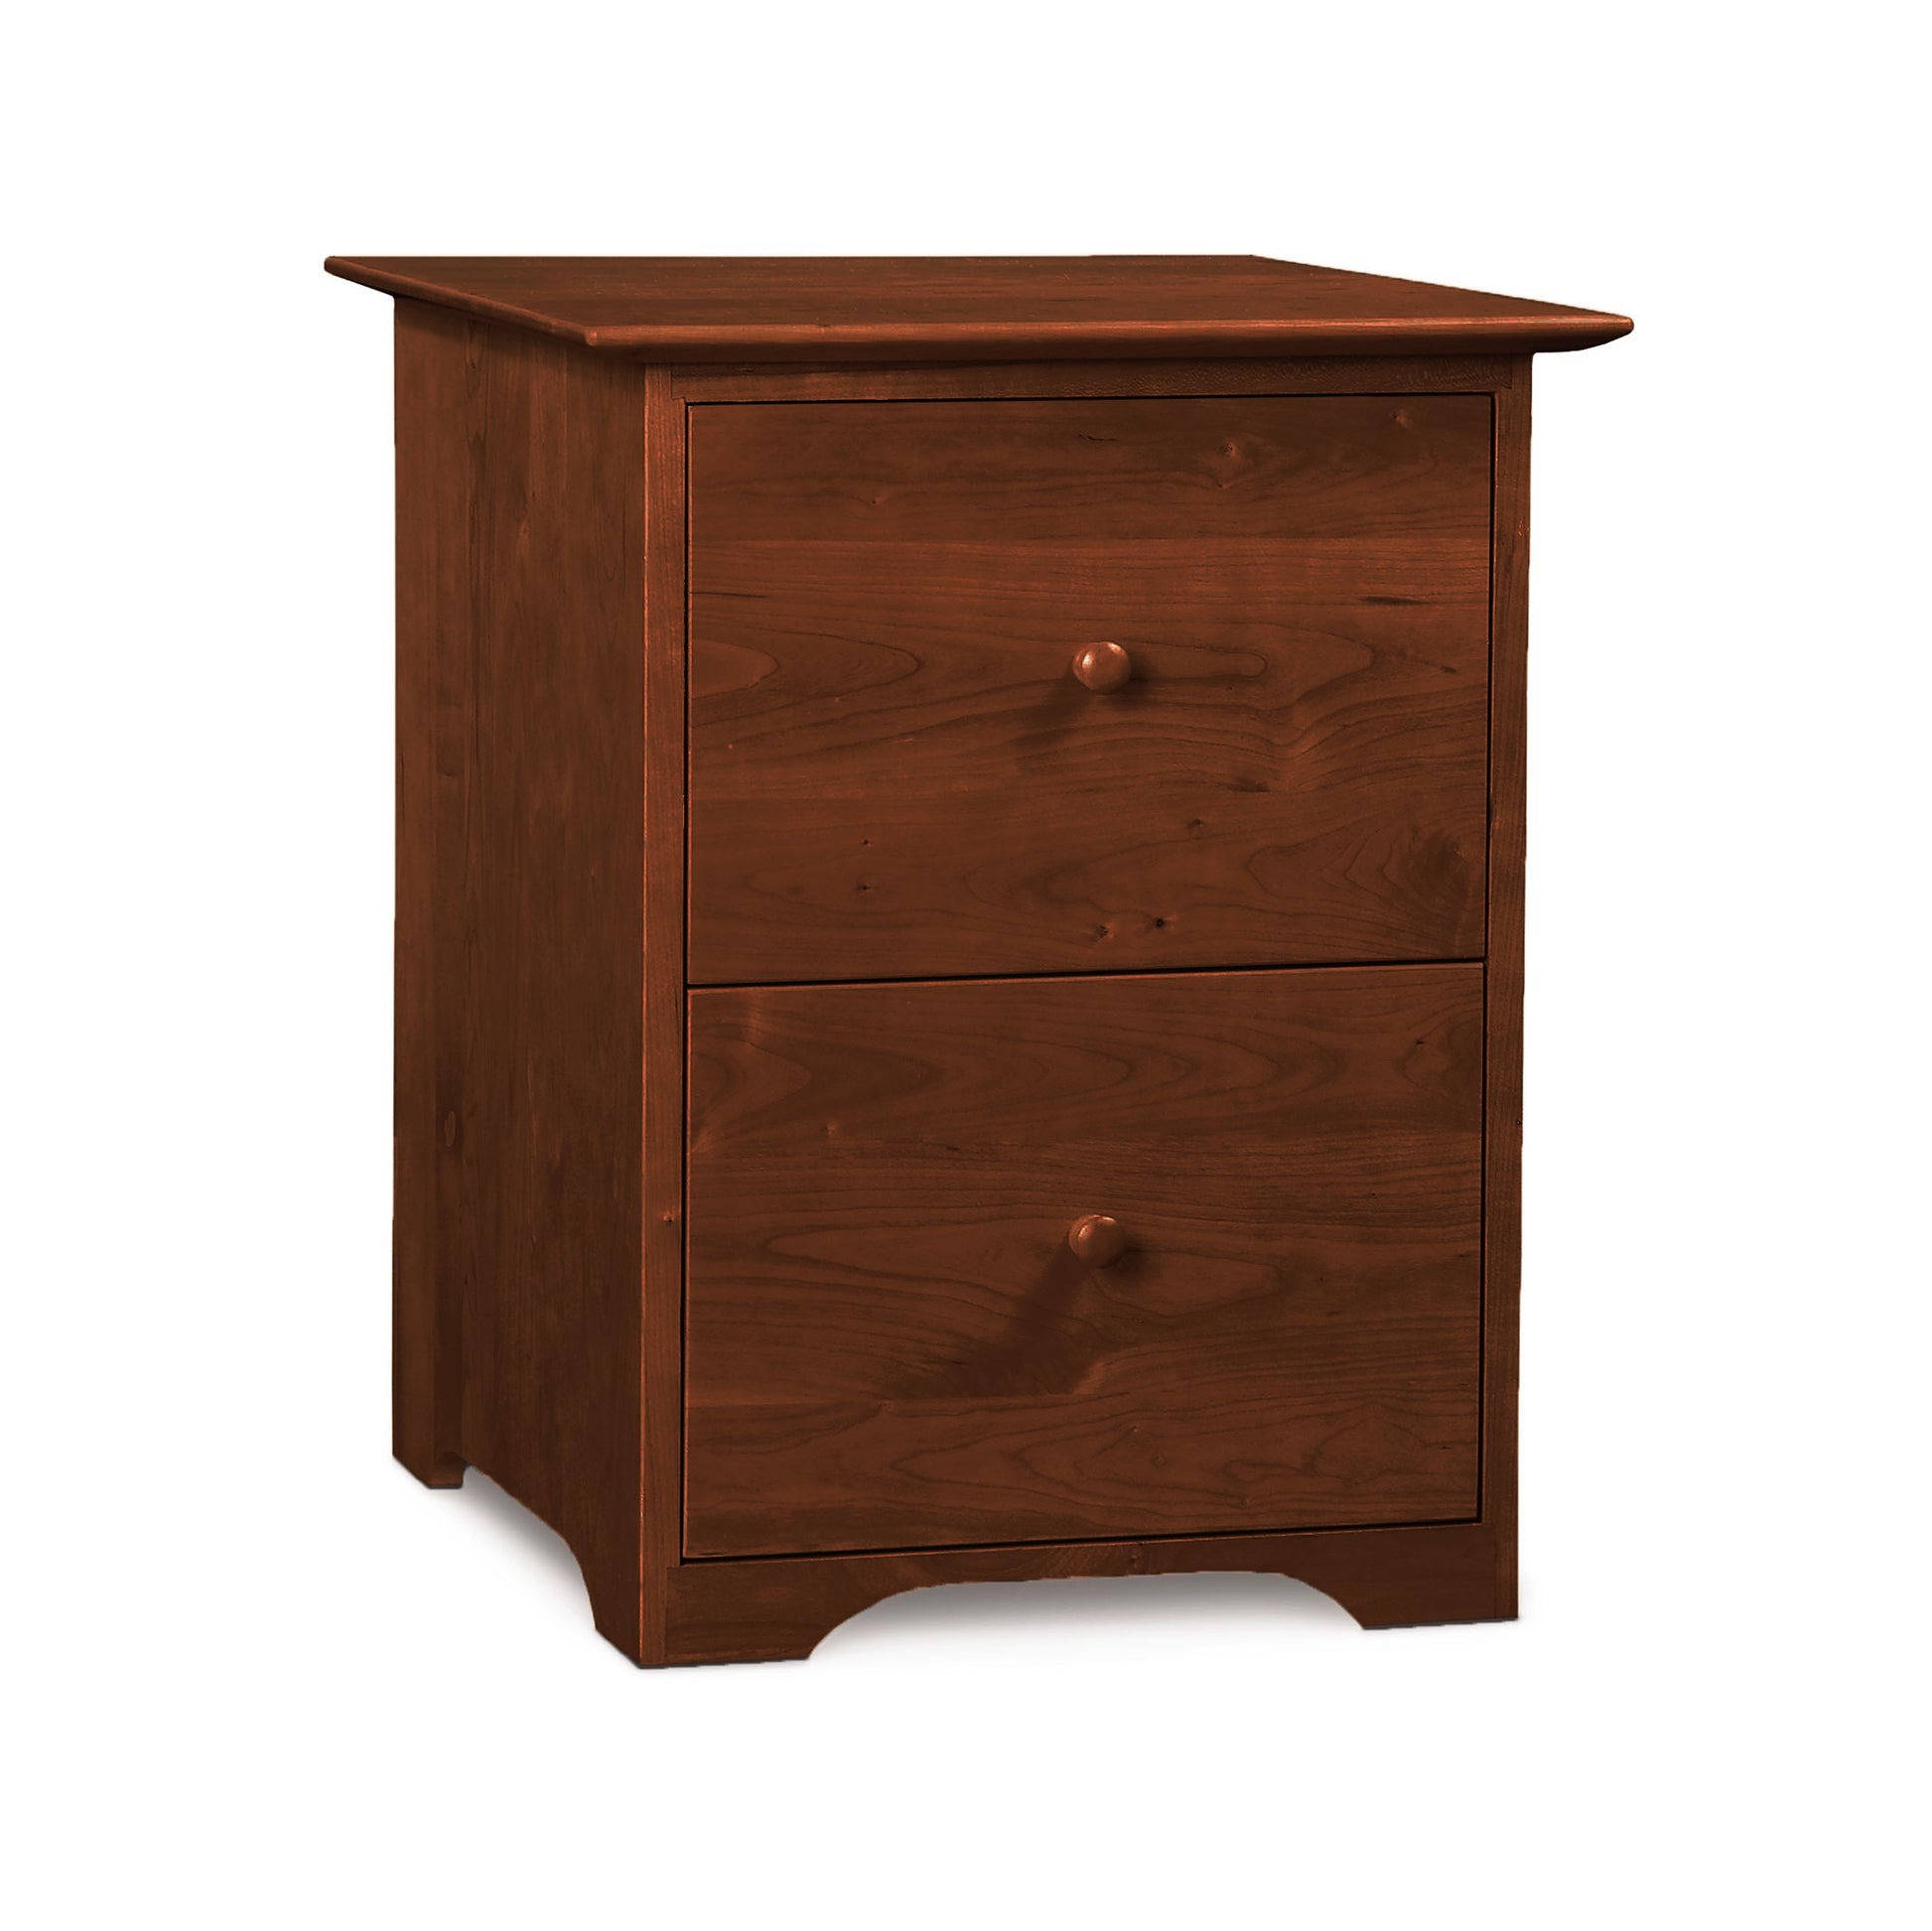 Copeland Furniture's Sarah Rolling Filing Cabinet with a simple design and round knobs on a white background, made from sustainably harvested woods.